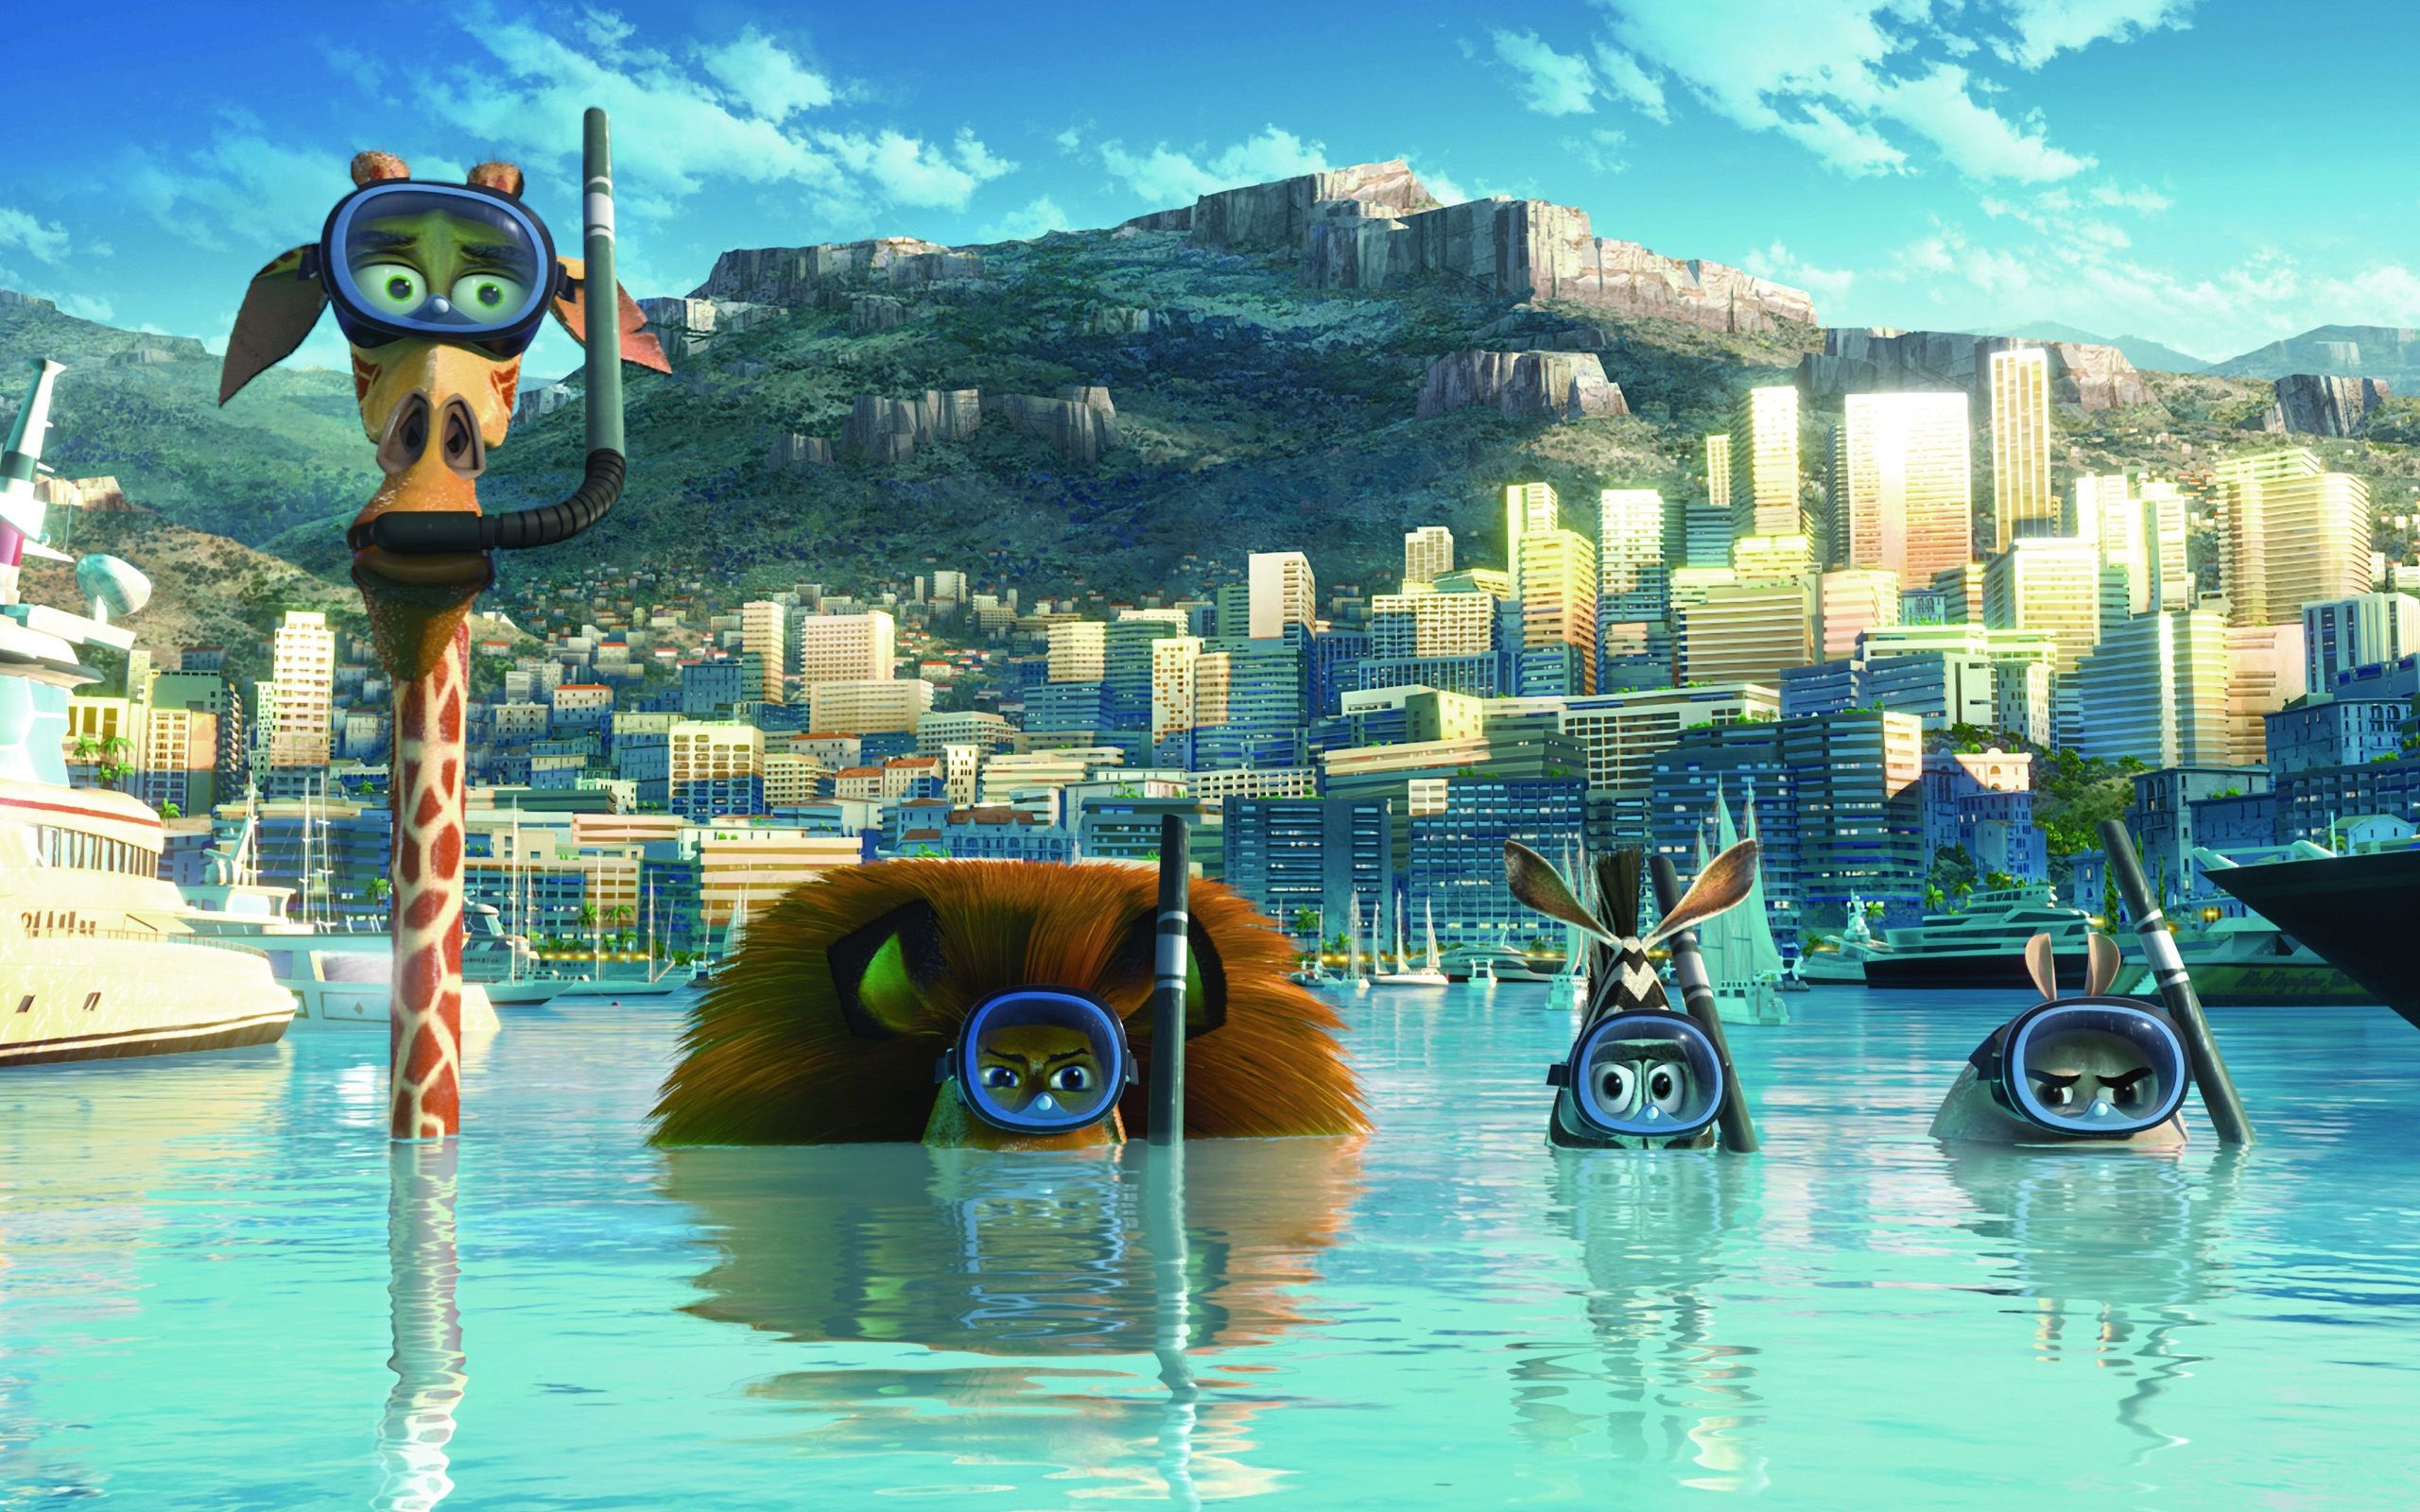 Wallpapers Tagged With MADAGASCAR | MADAGASCAR HD Wallpapers | Page 1